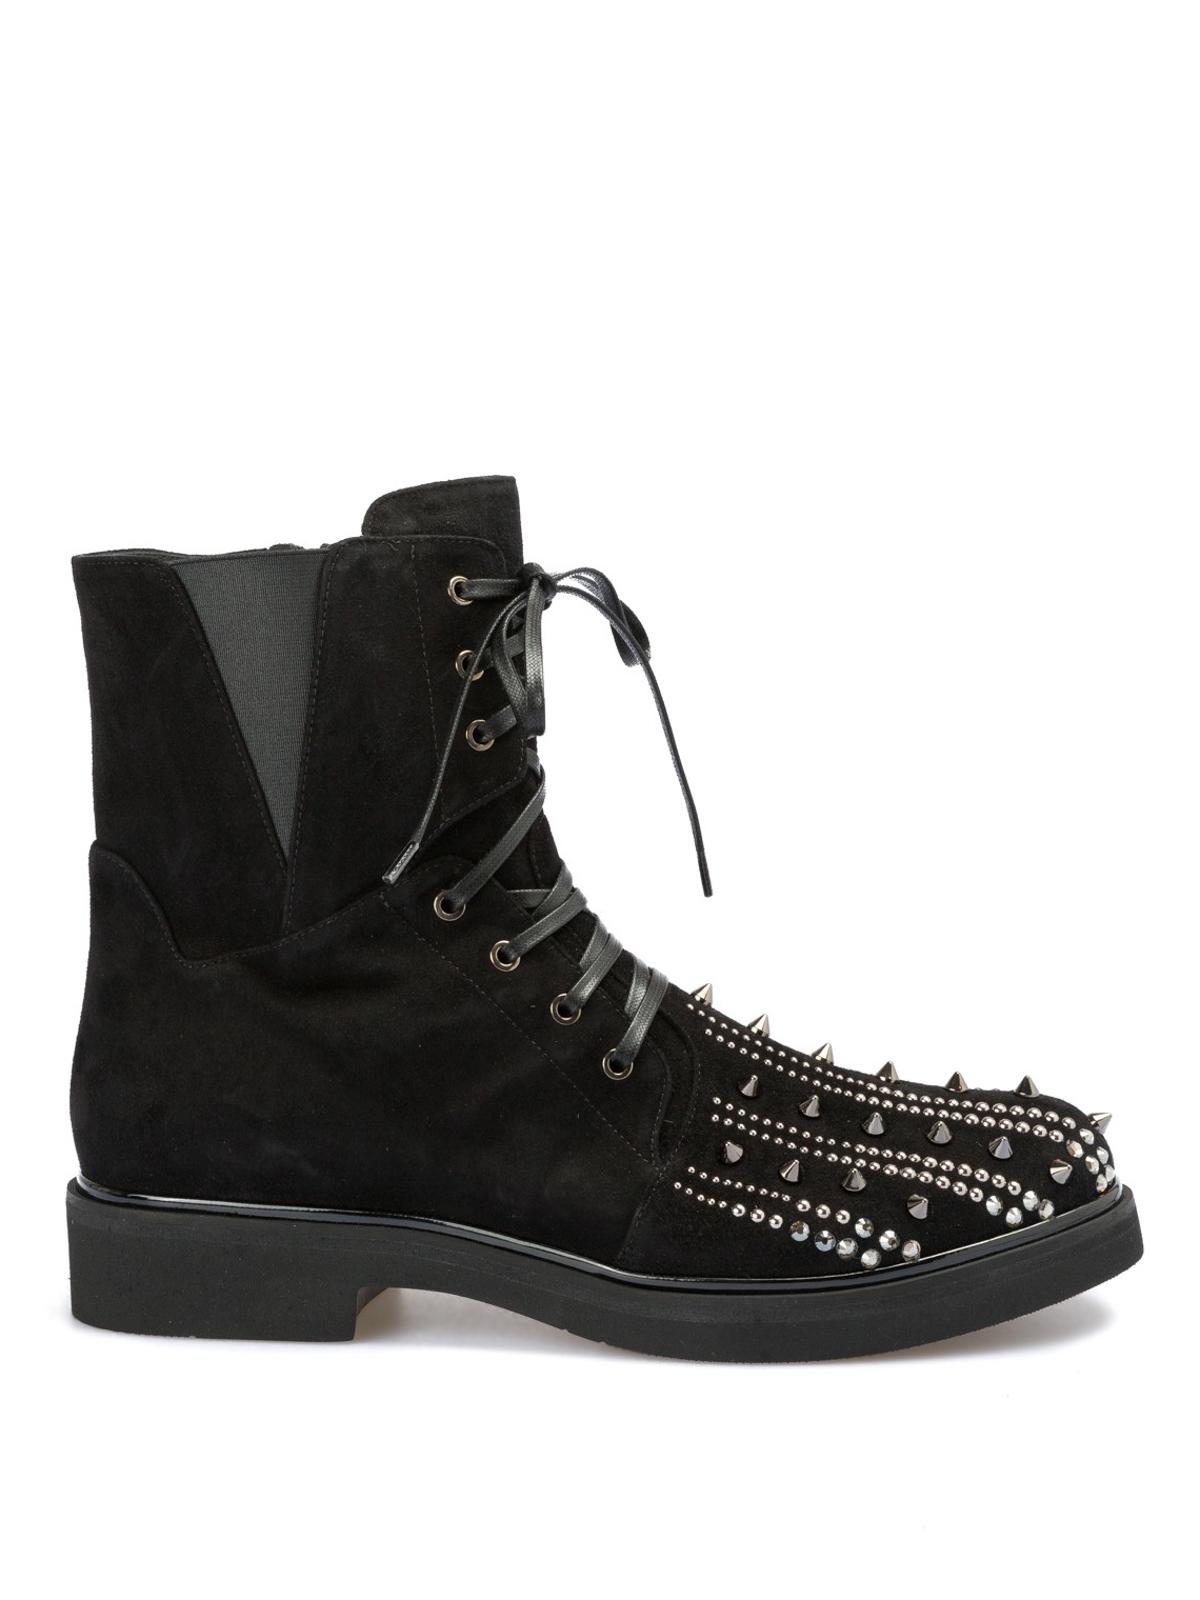 Loriblu Studded Toe Laced-up Suede Combat Boots in Black - Lyst